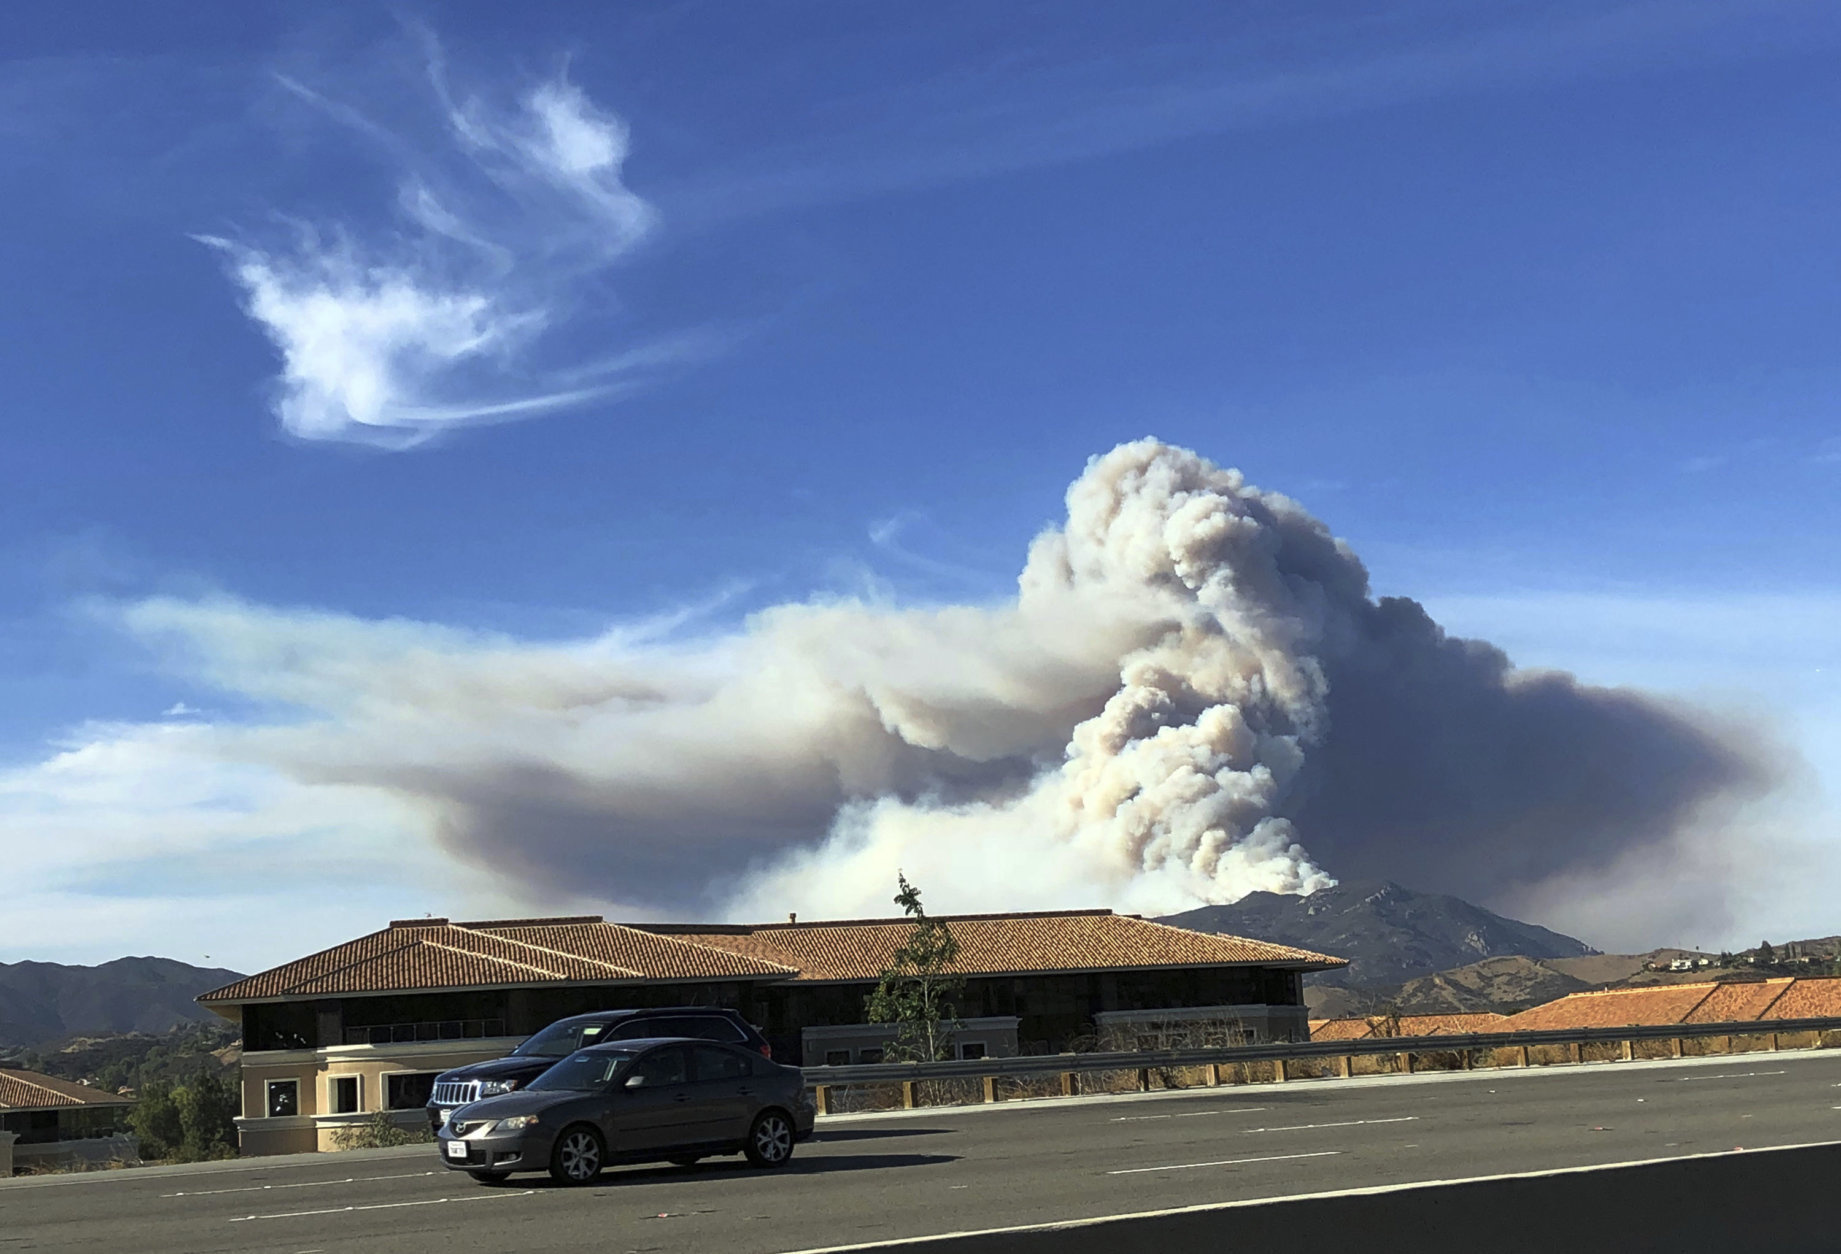 A large wildfire plume from a recent flareup near Lake Sherwood, Calif., is visible from Highway 101 north of Los Angeles, Tuesday, Nov. 13, 2018. (AP Photo/Amanda Myers)